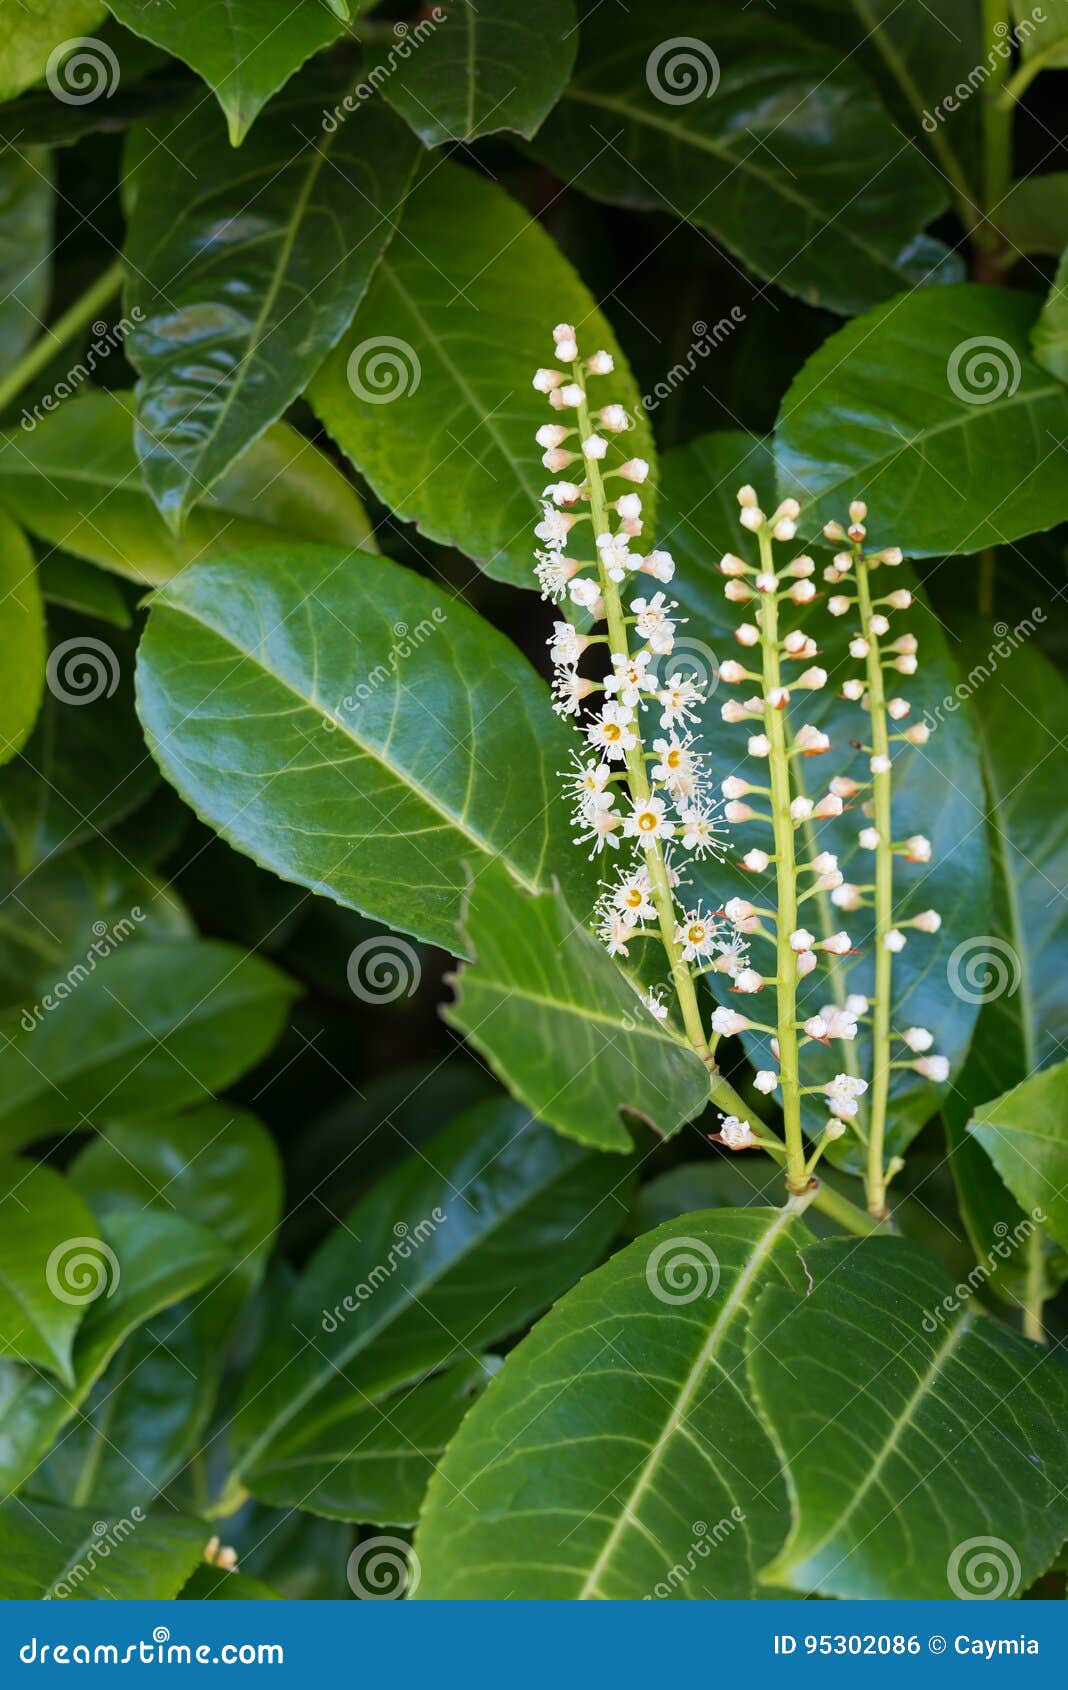 cherry laurel flowers and leaves. common hedging plant.